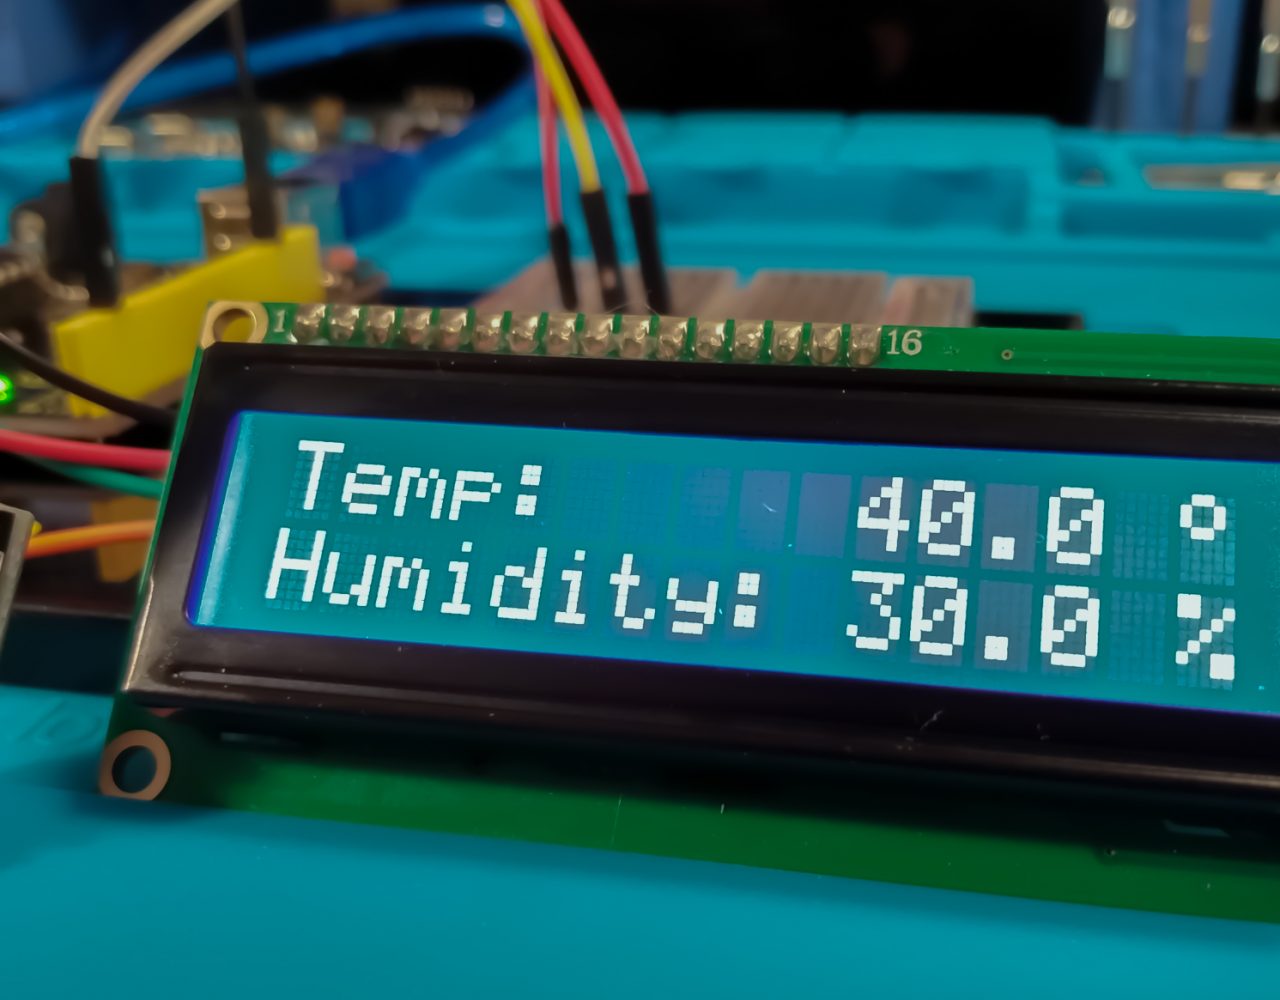 temp-and-humidity-feature-arduino